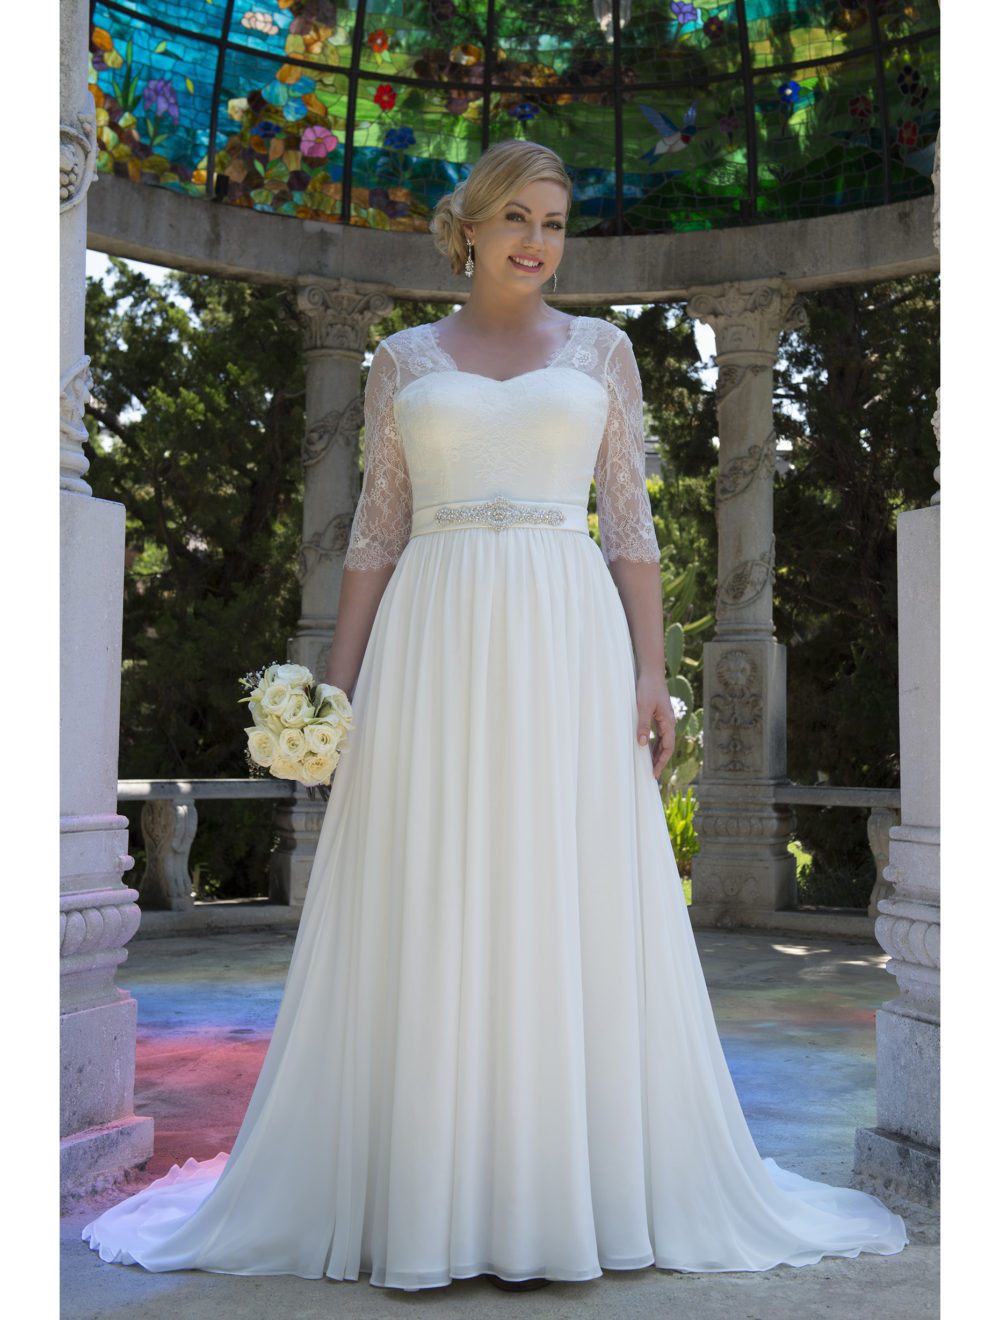 Wedding Dresses Plus Size With Sleeves
 Informal Lace Chiffon Modest Plus Size Wedding Dresses